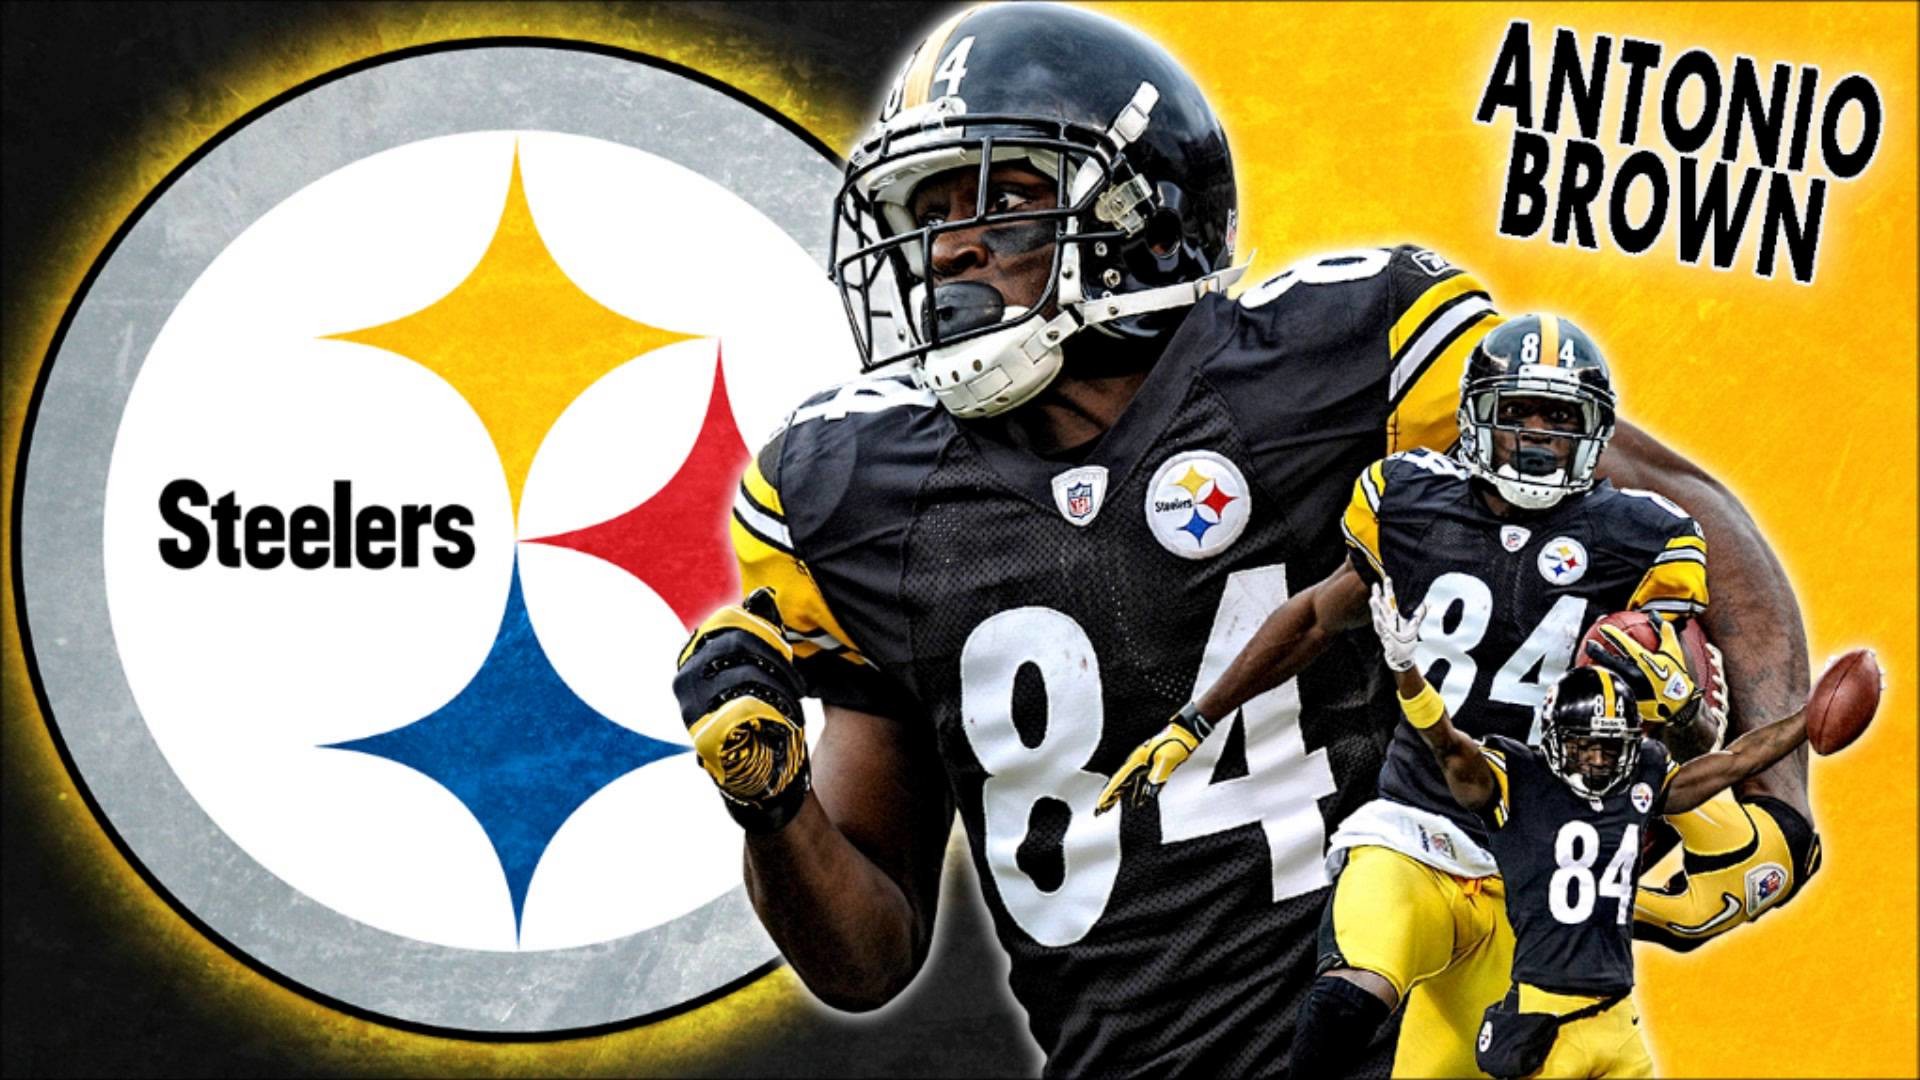 1920x1080 ... Attachment for Antonio Brown Steelers Wallpaper 9 of 37 ...